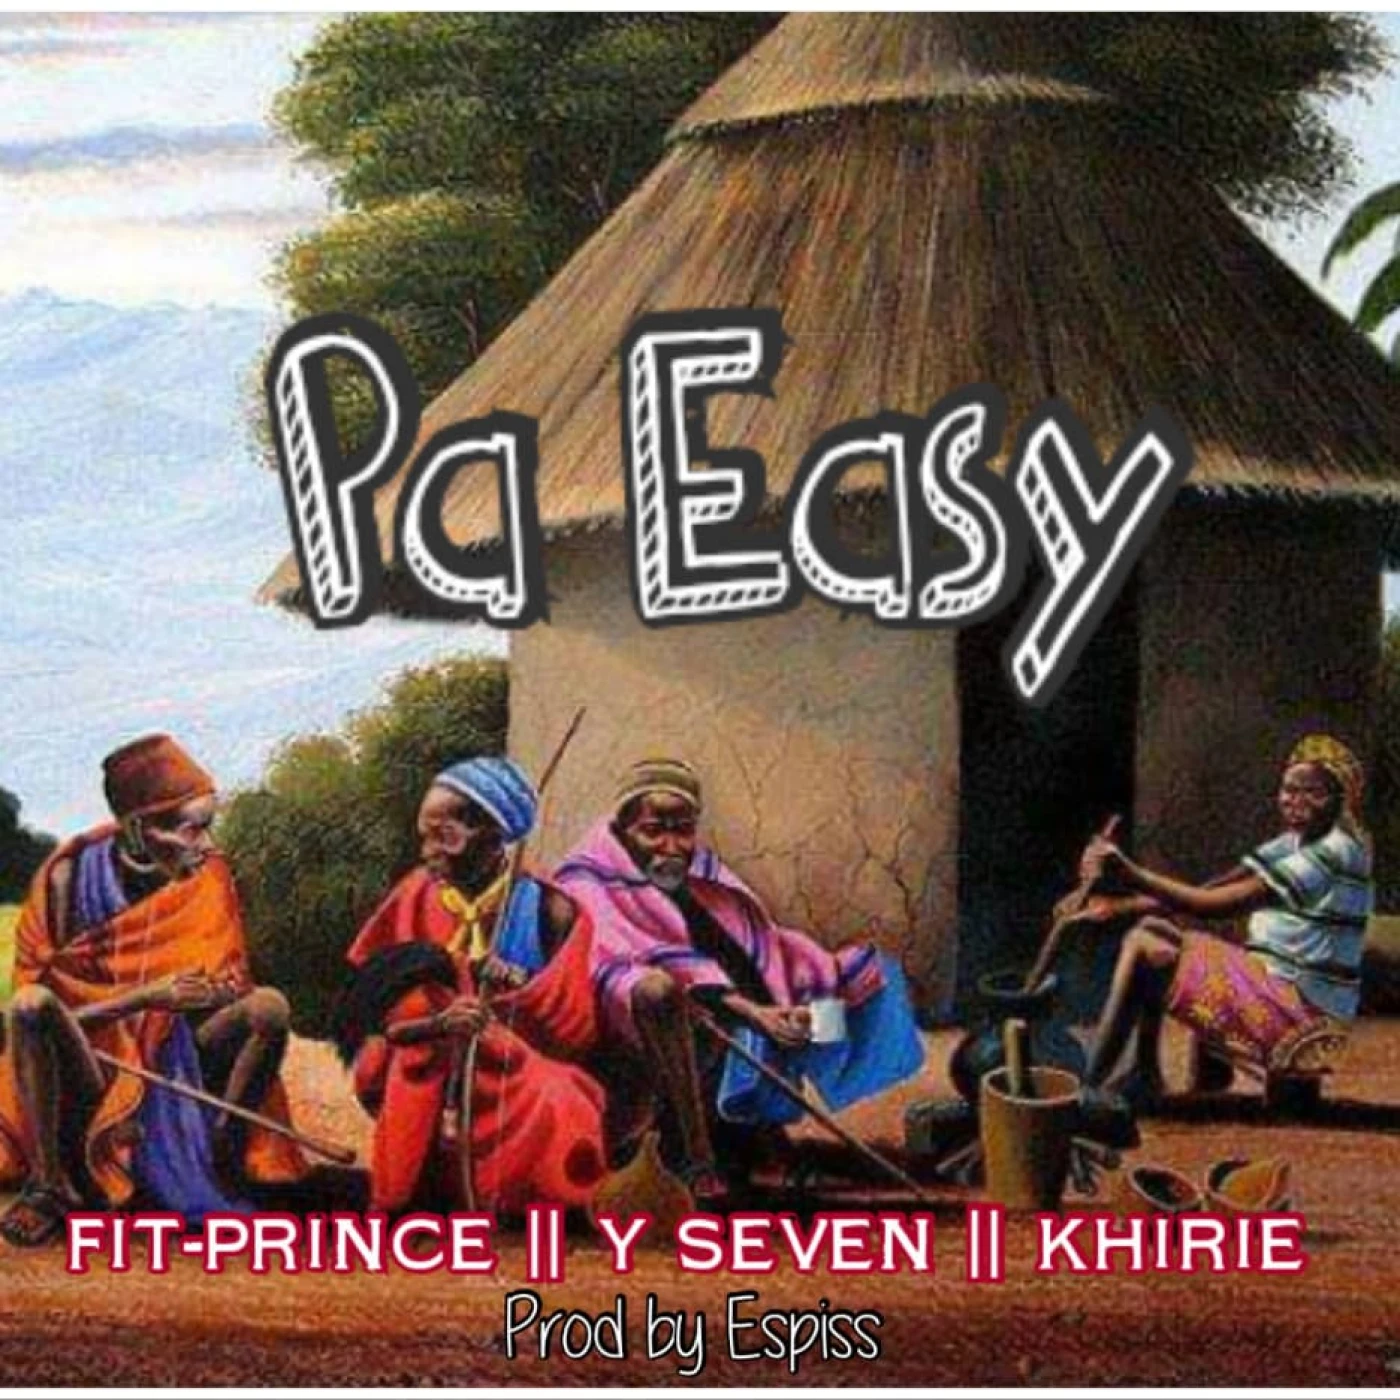 pa-easy-ft-y-seven-khirie-fit-prince-Just Malawi Music